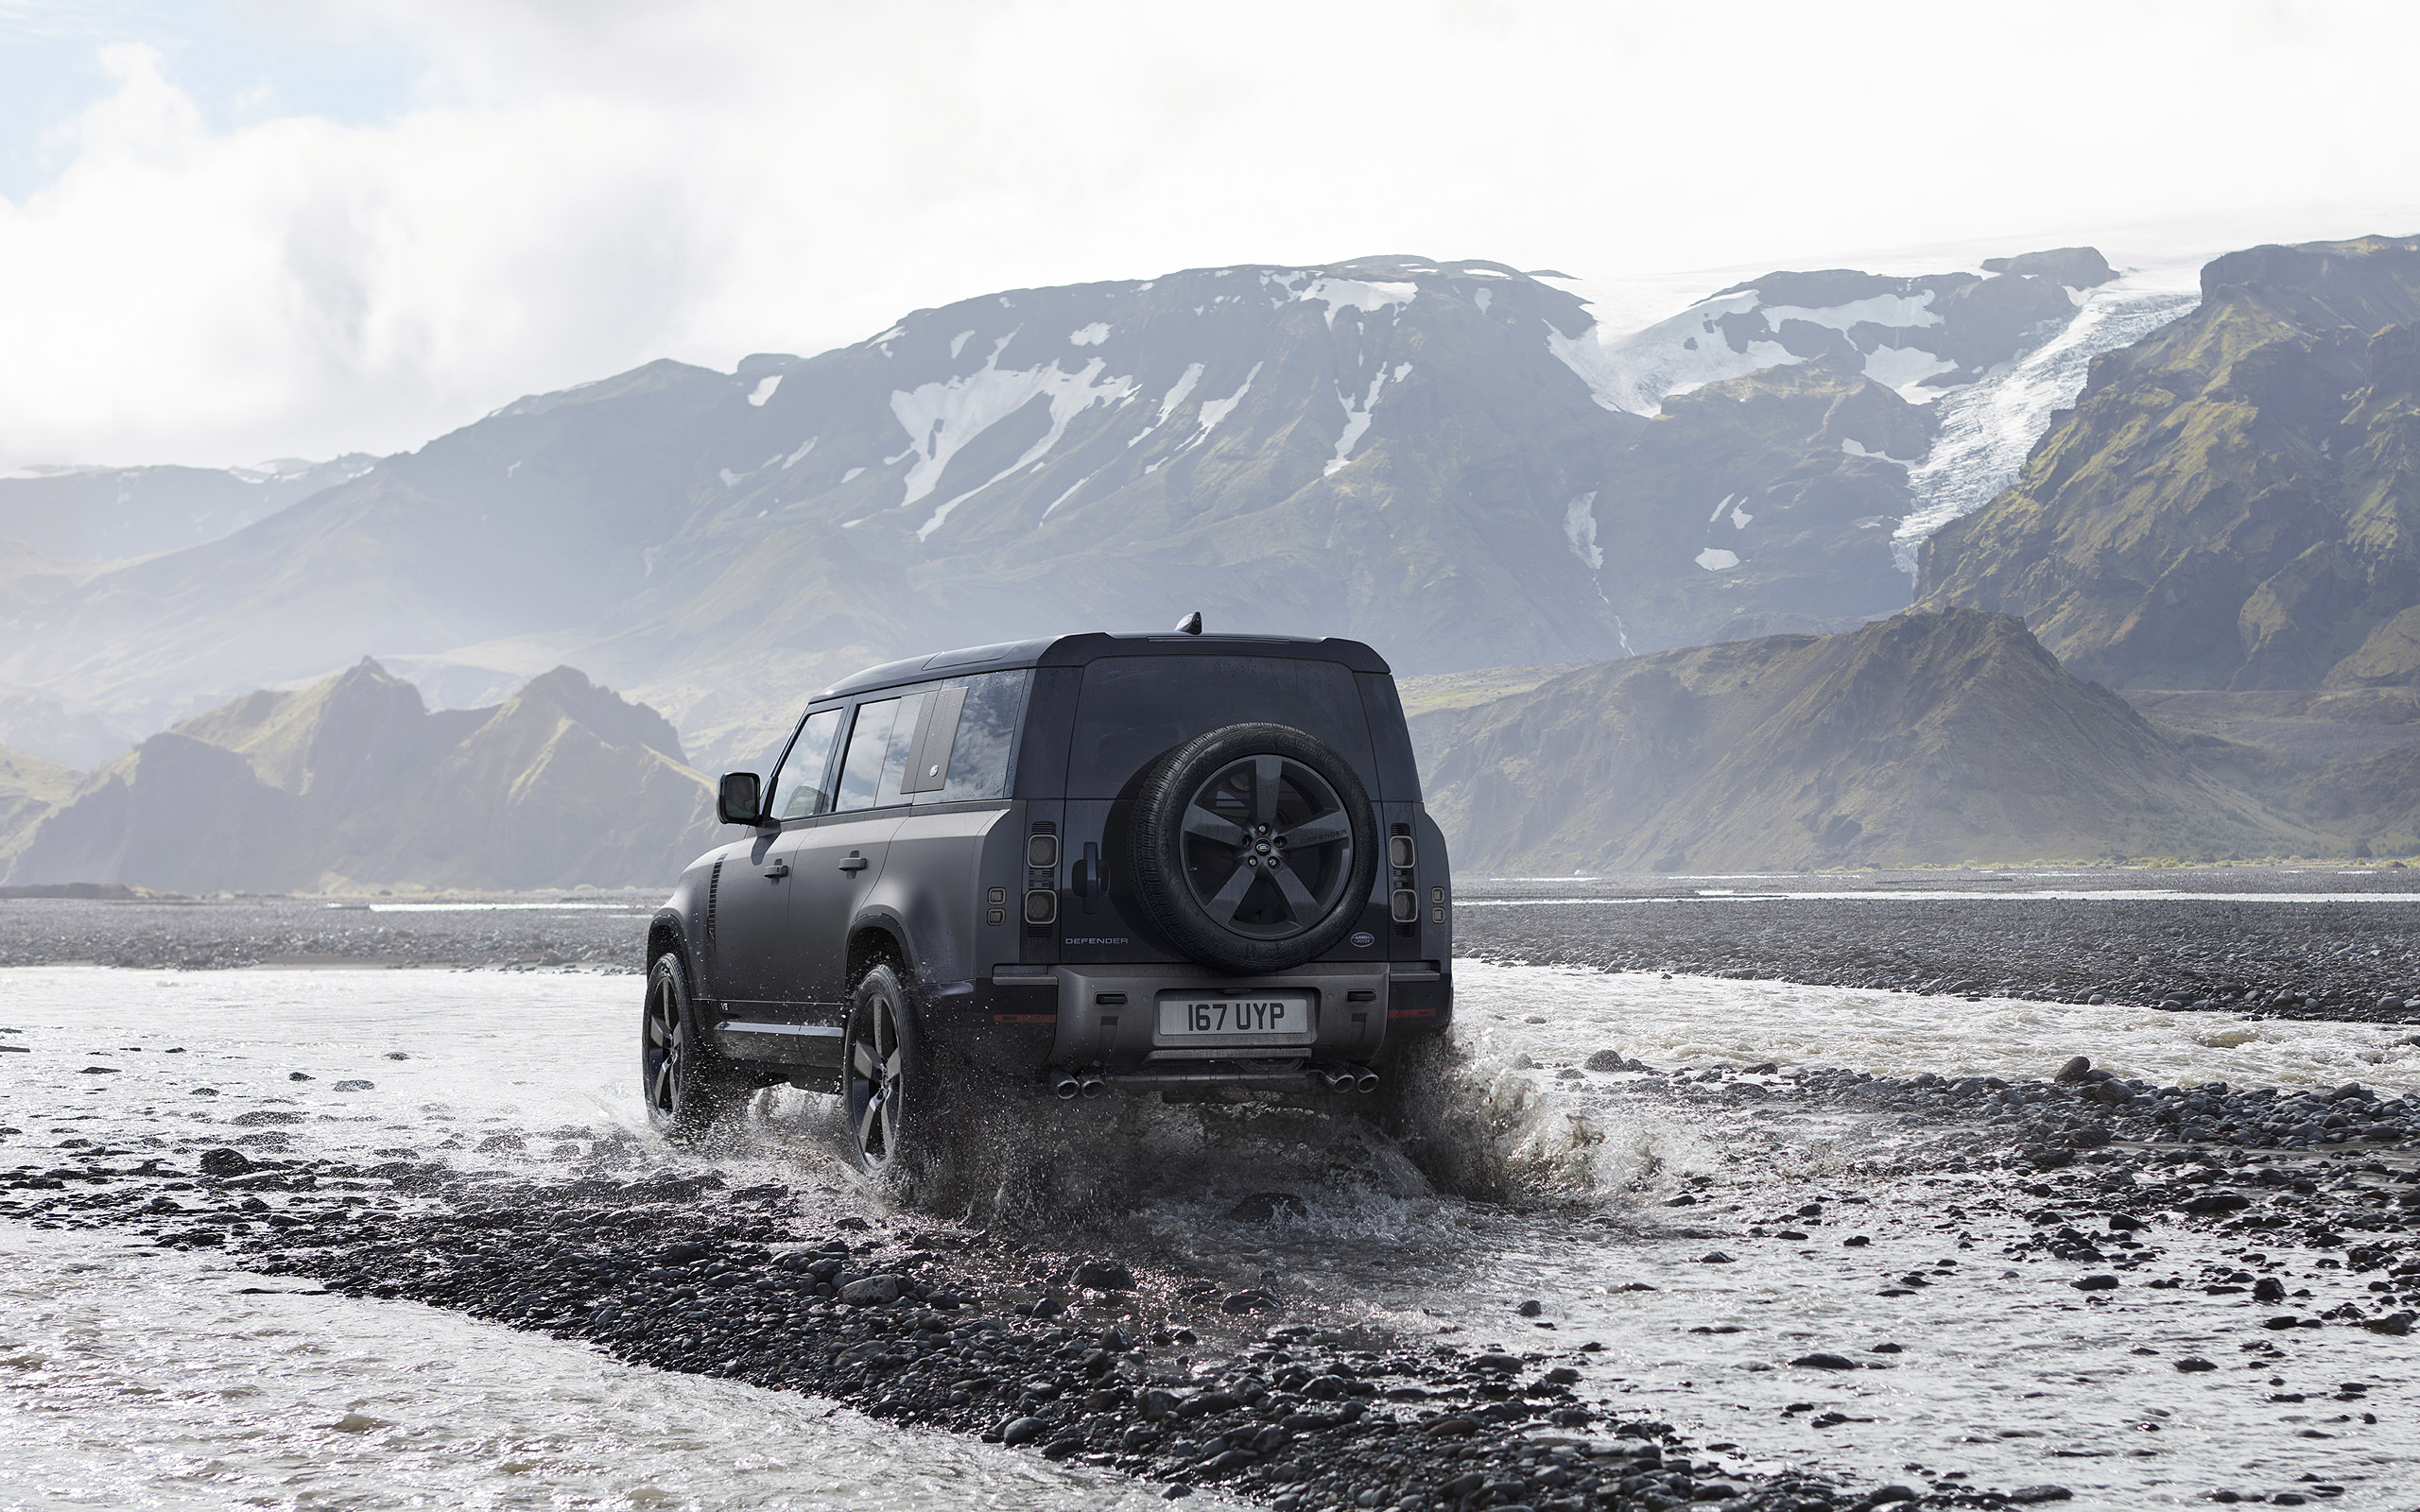 Off-road Driving: Land Rover Defender, 2022, Travelling over difficult terrain, Rock crawling. 2560x1600 HD Wallpaper.